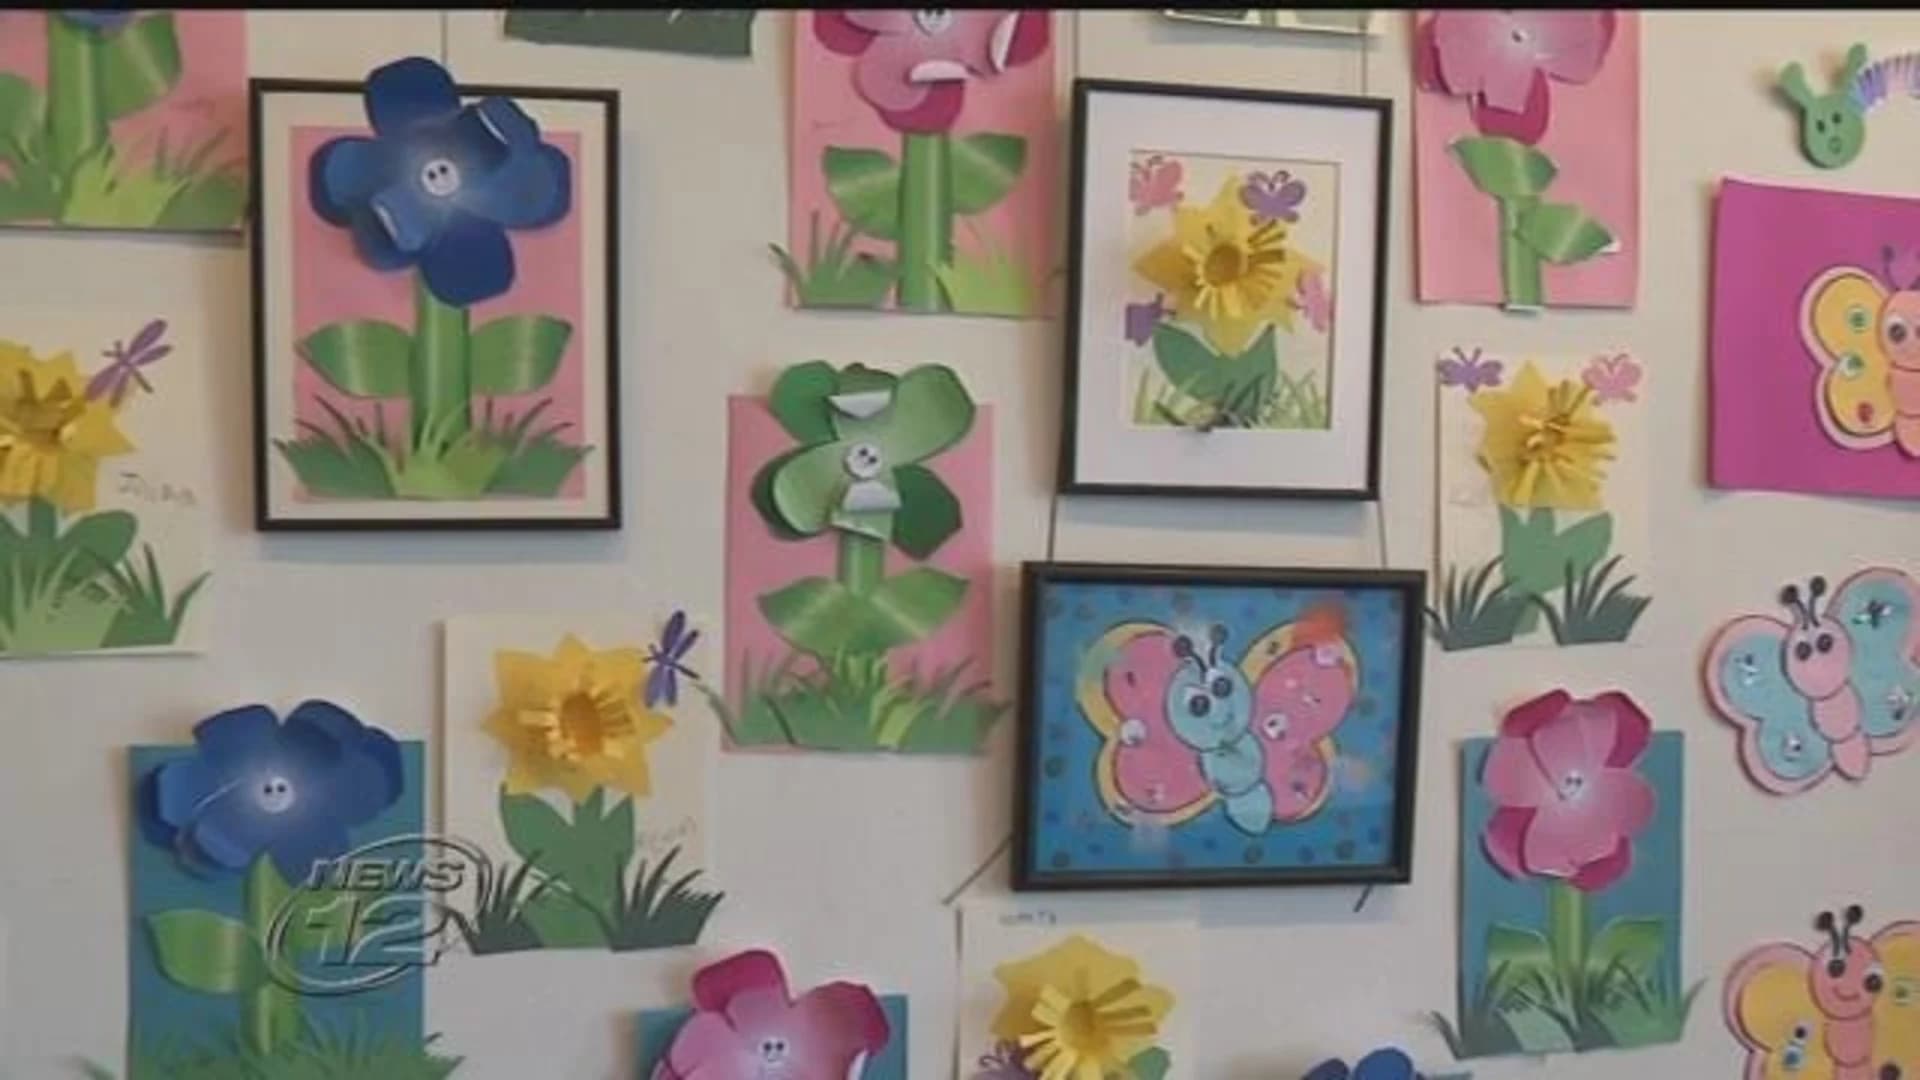 Art exhibit showcases works from NJ students with disabilities